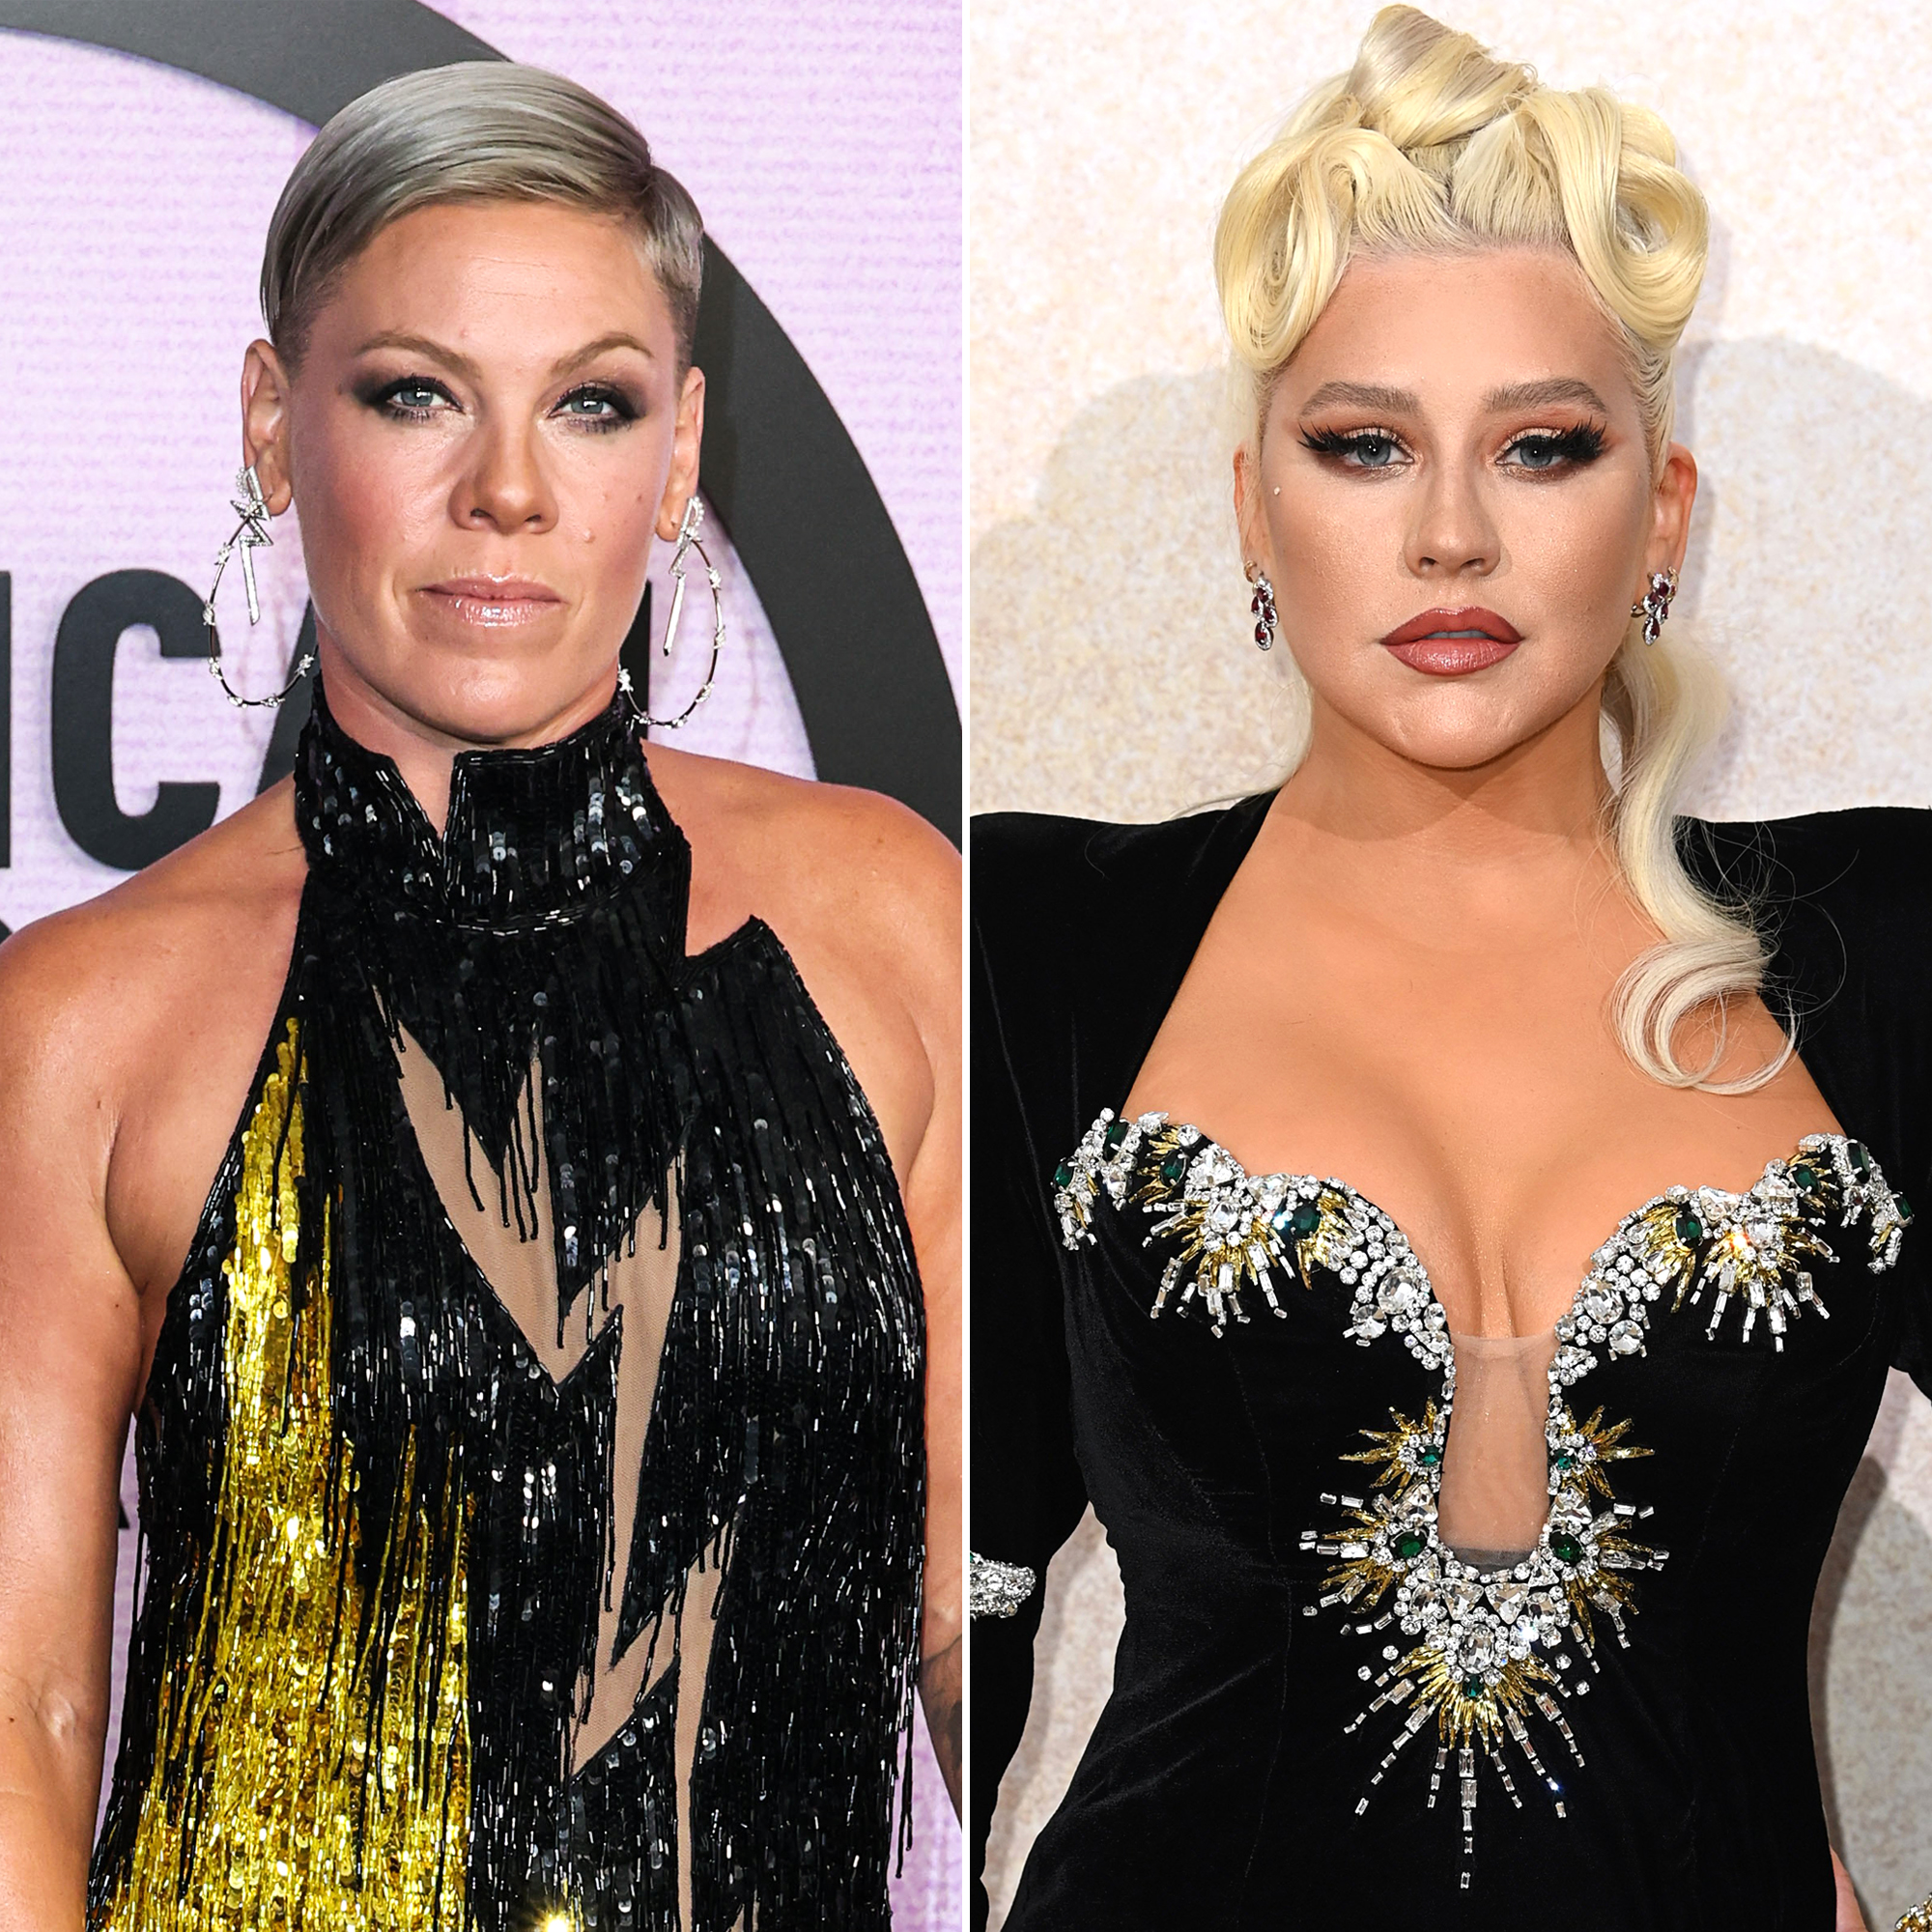 Pink Tells Christina Aguilera: 'You Know Where We Stand'